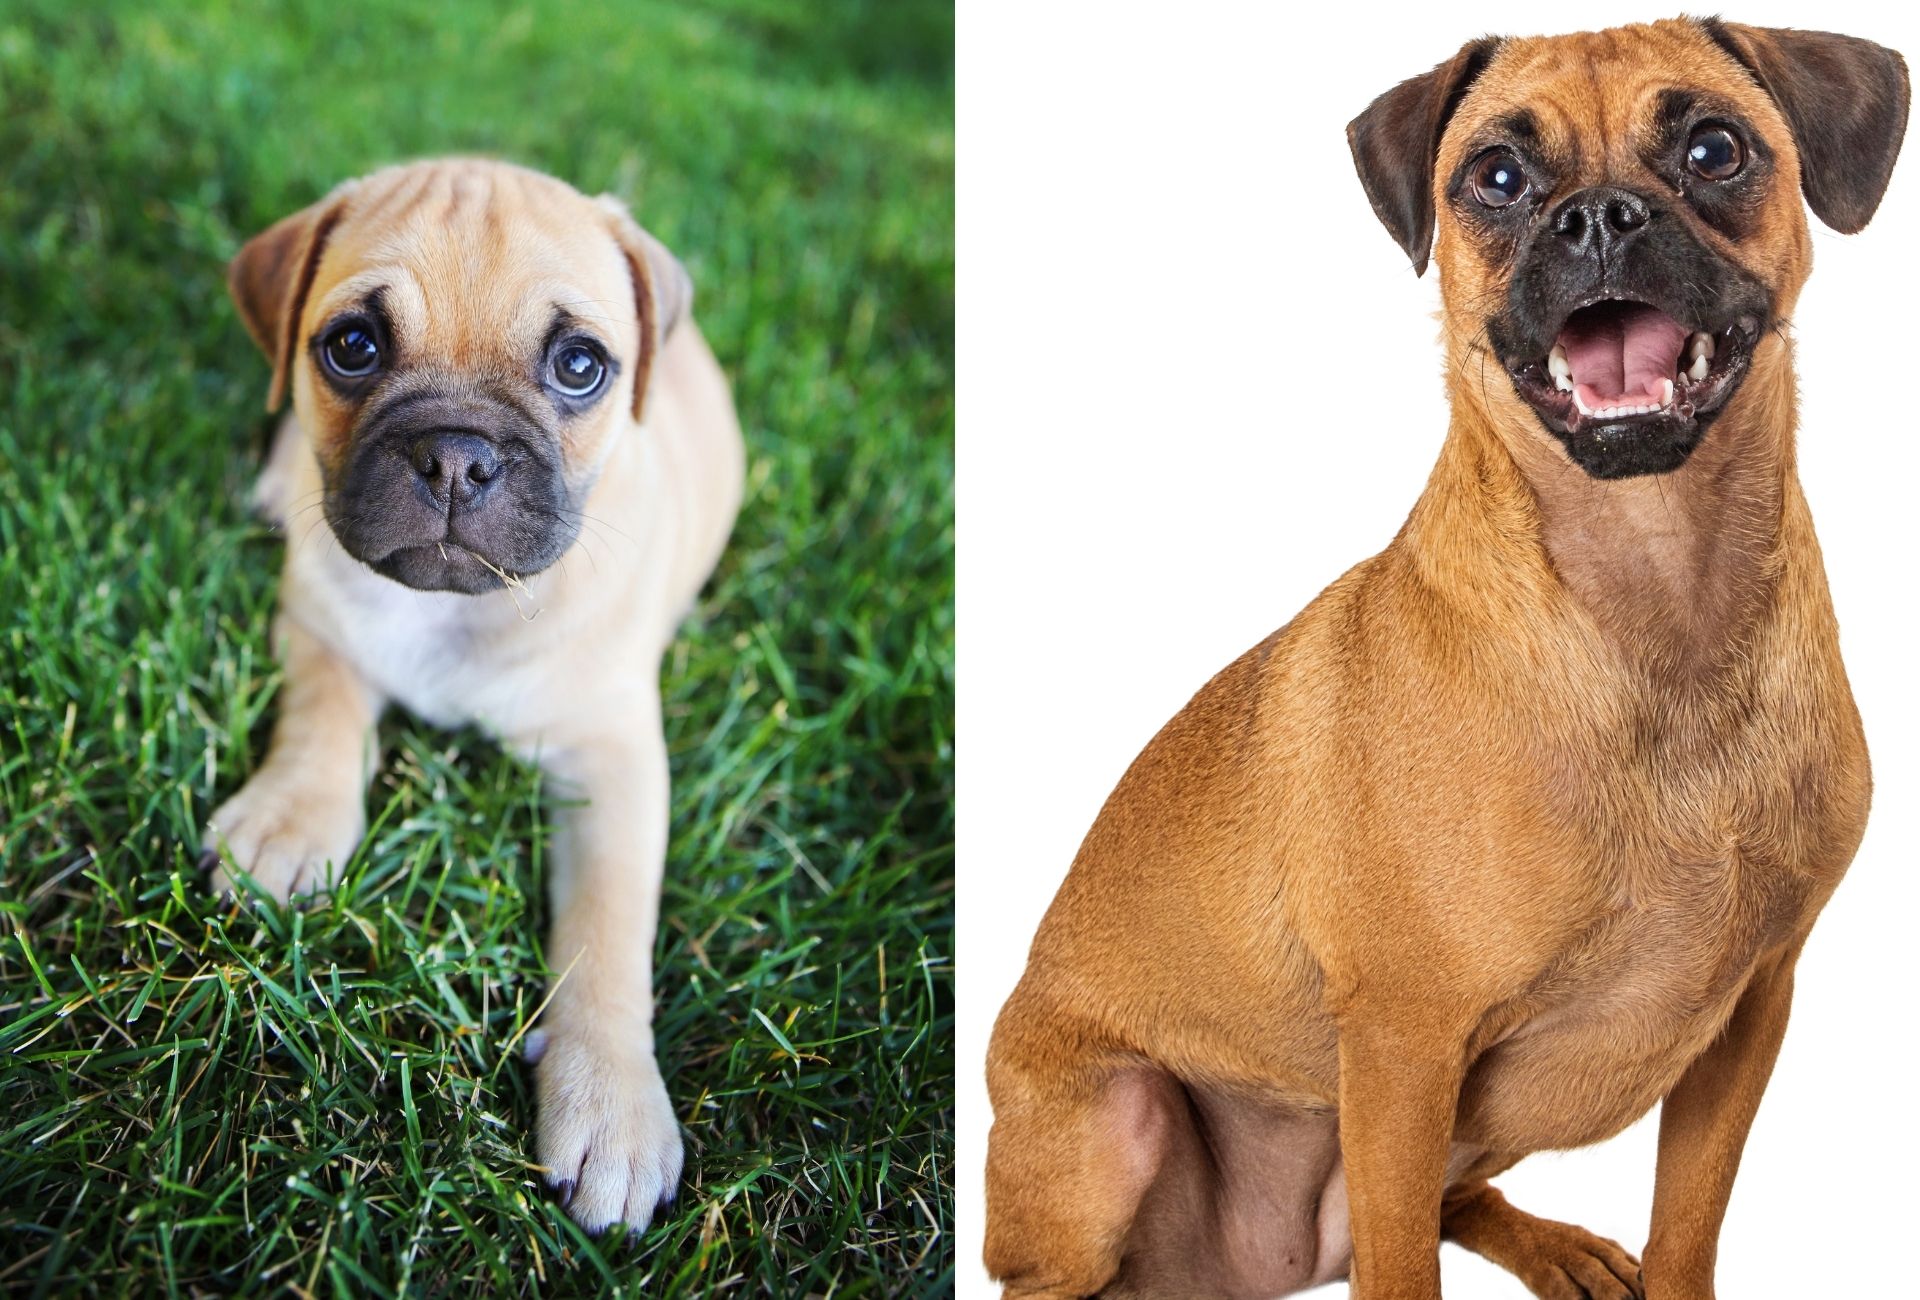 Retro Pug with potentially less health issues, a Chihuahua-Pug cross on the left and a Beagle Pug mix on the right.